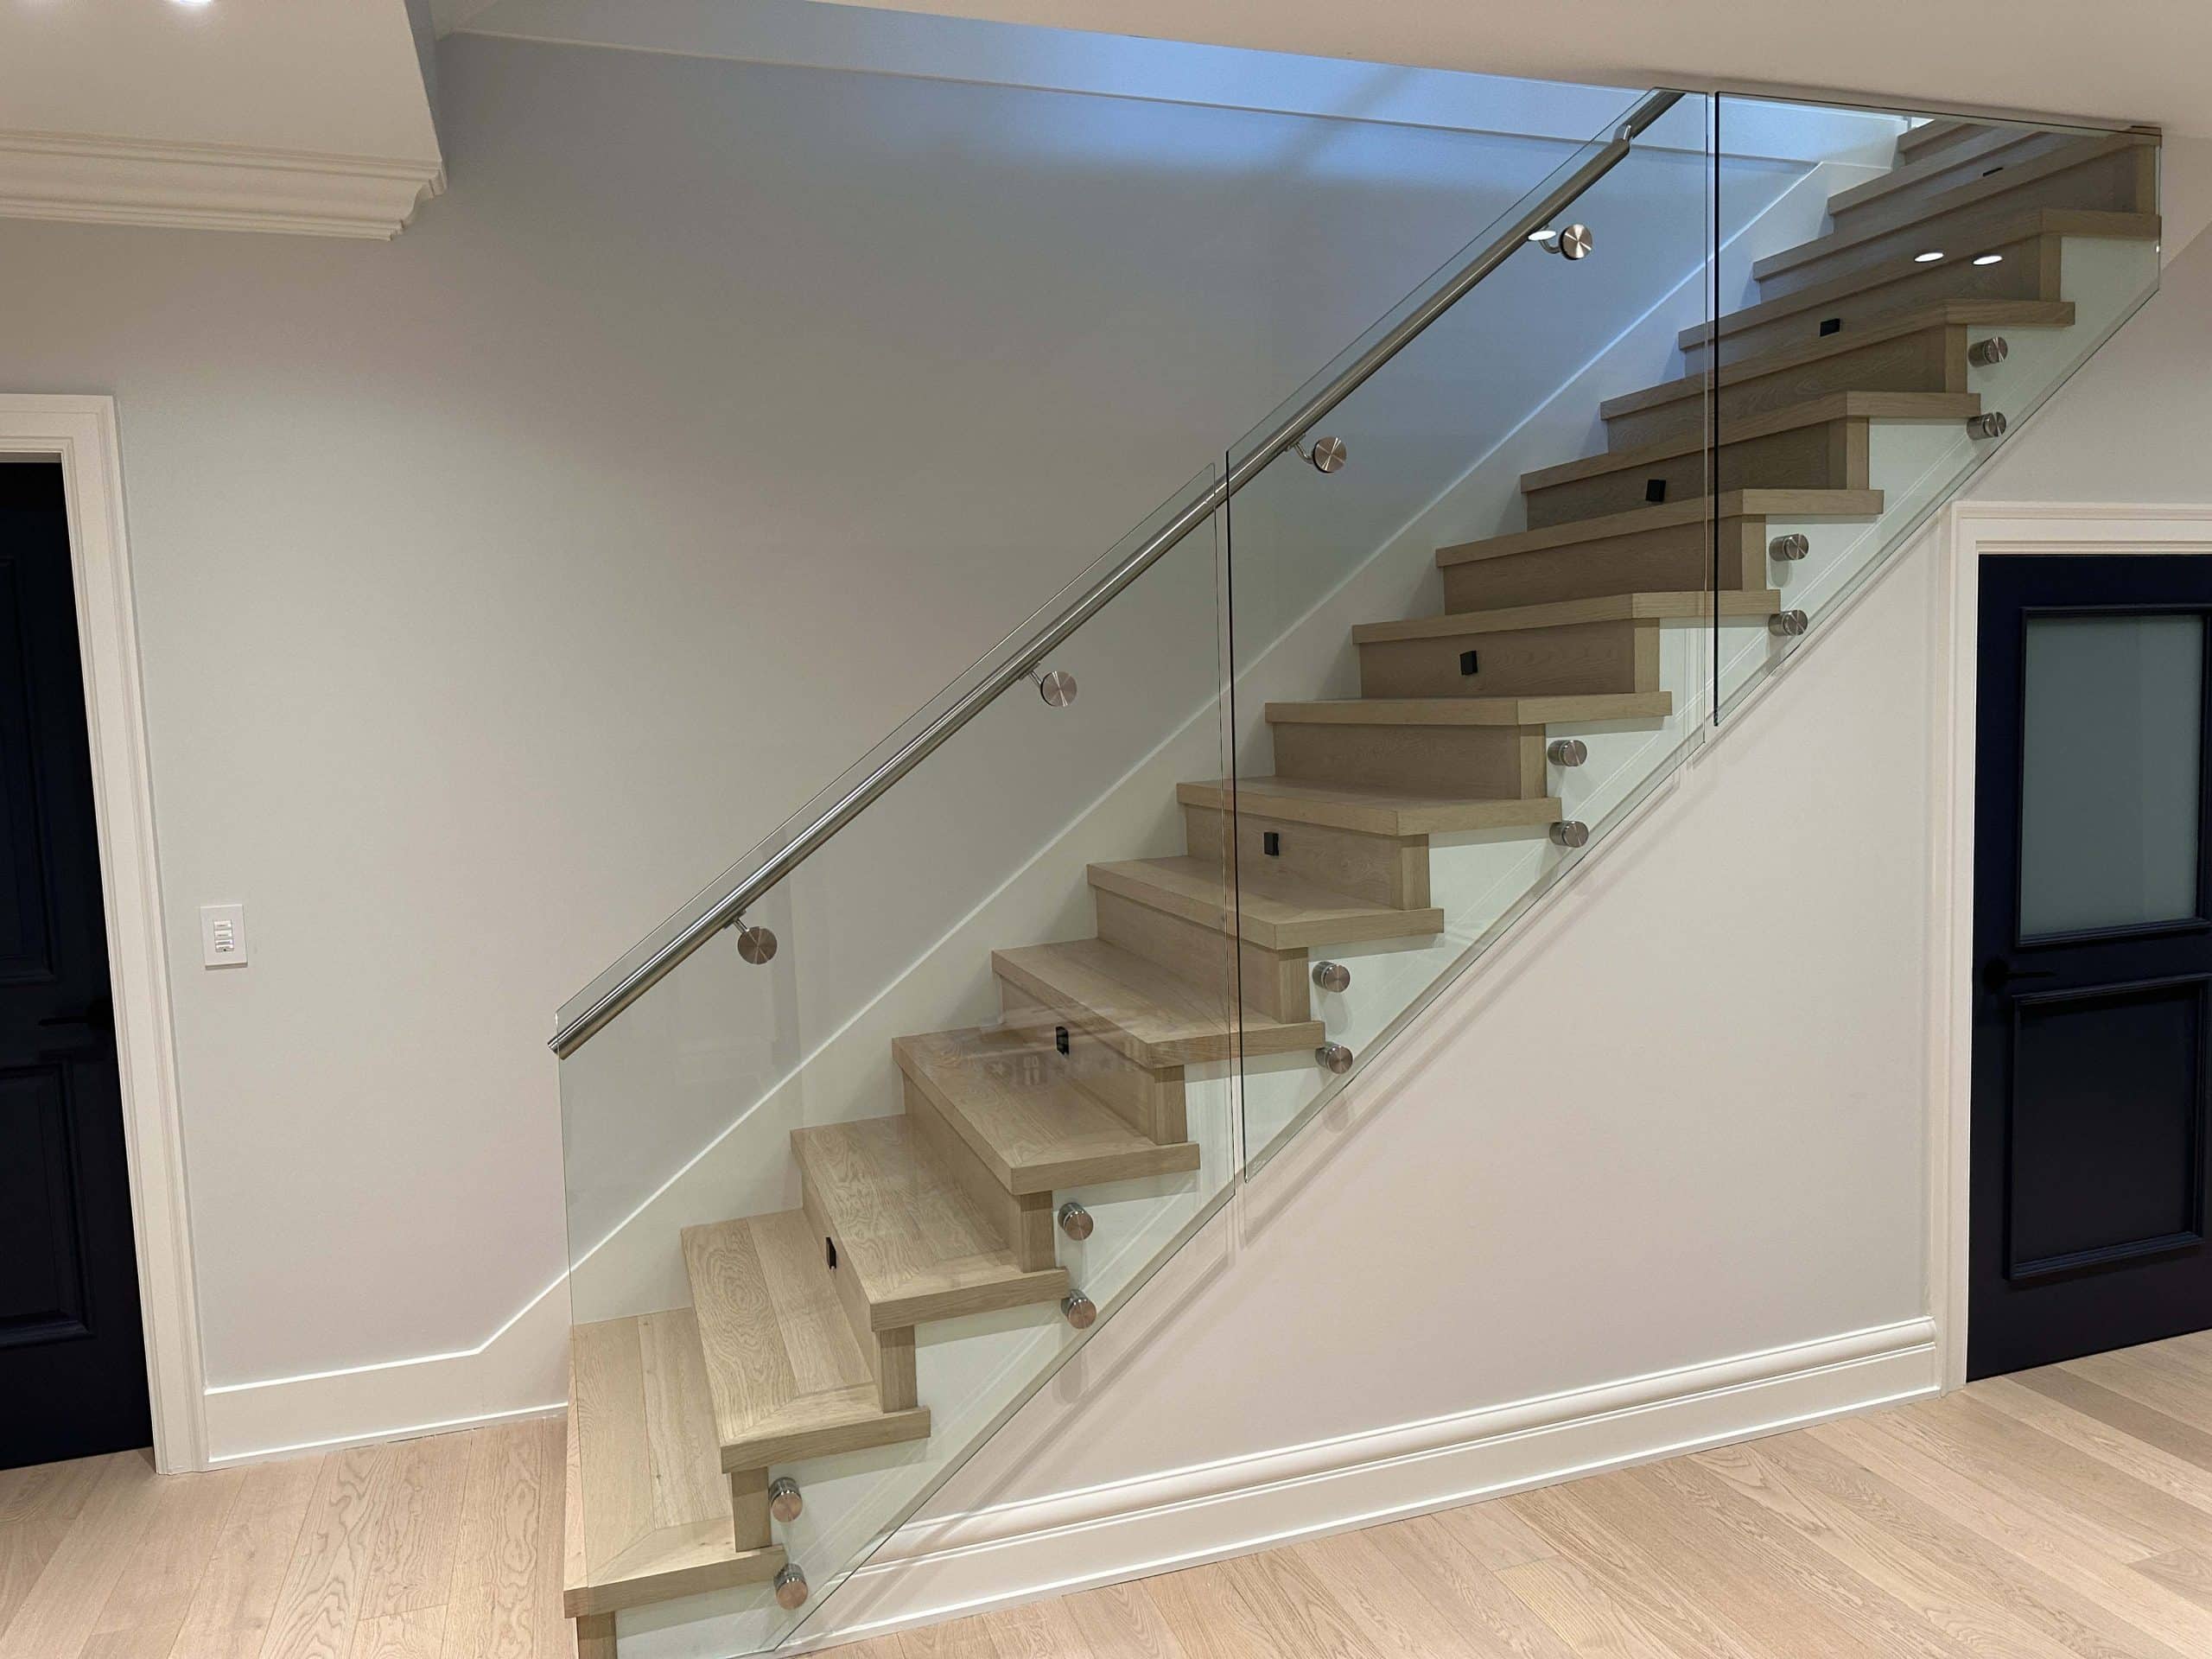 A home staircase with polished hardwood steps, blending seamlessly with the elegant hardwood floors